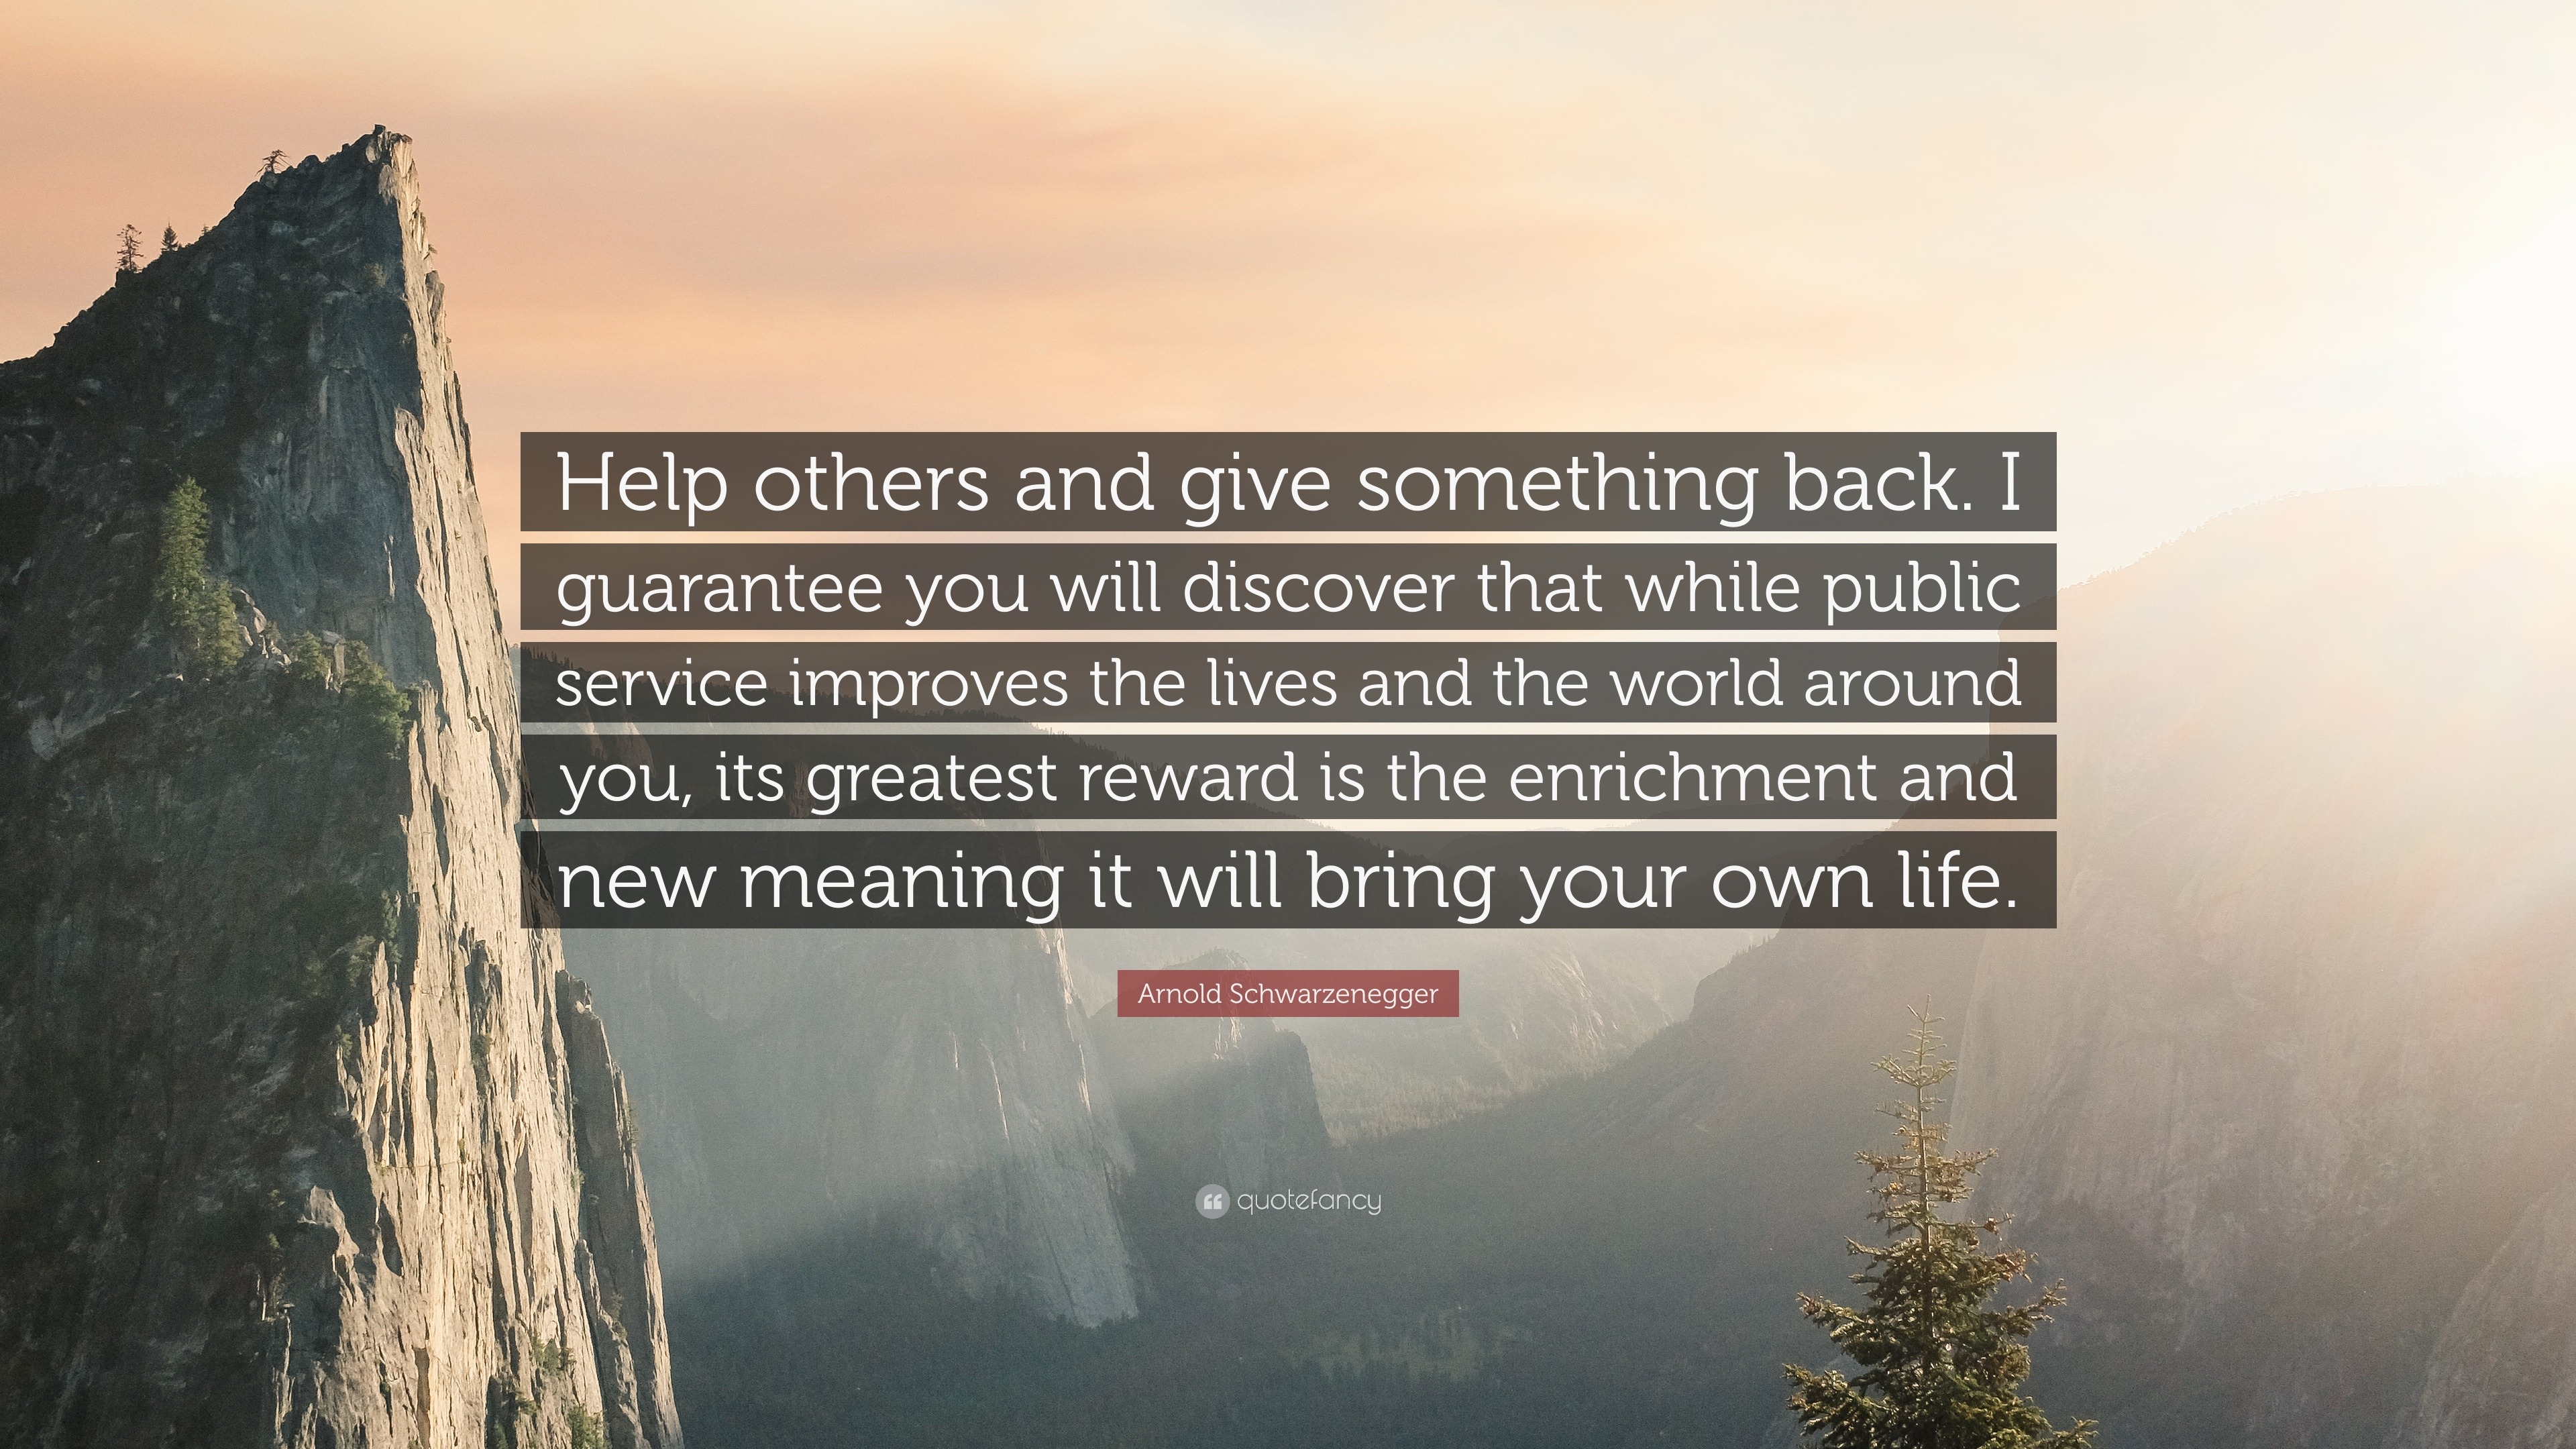 Give back meaning